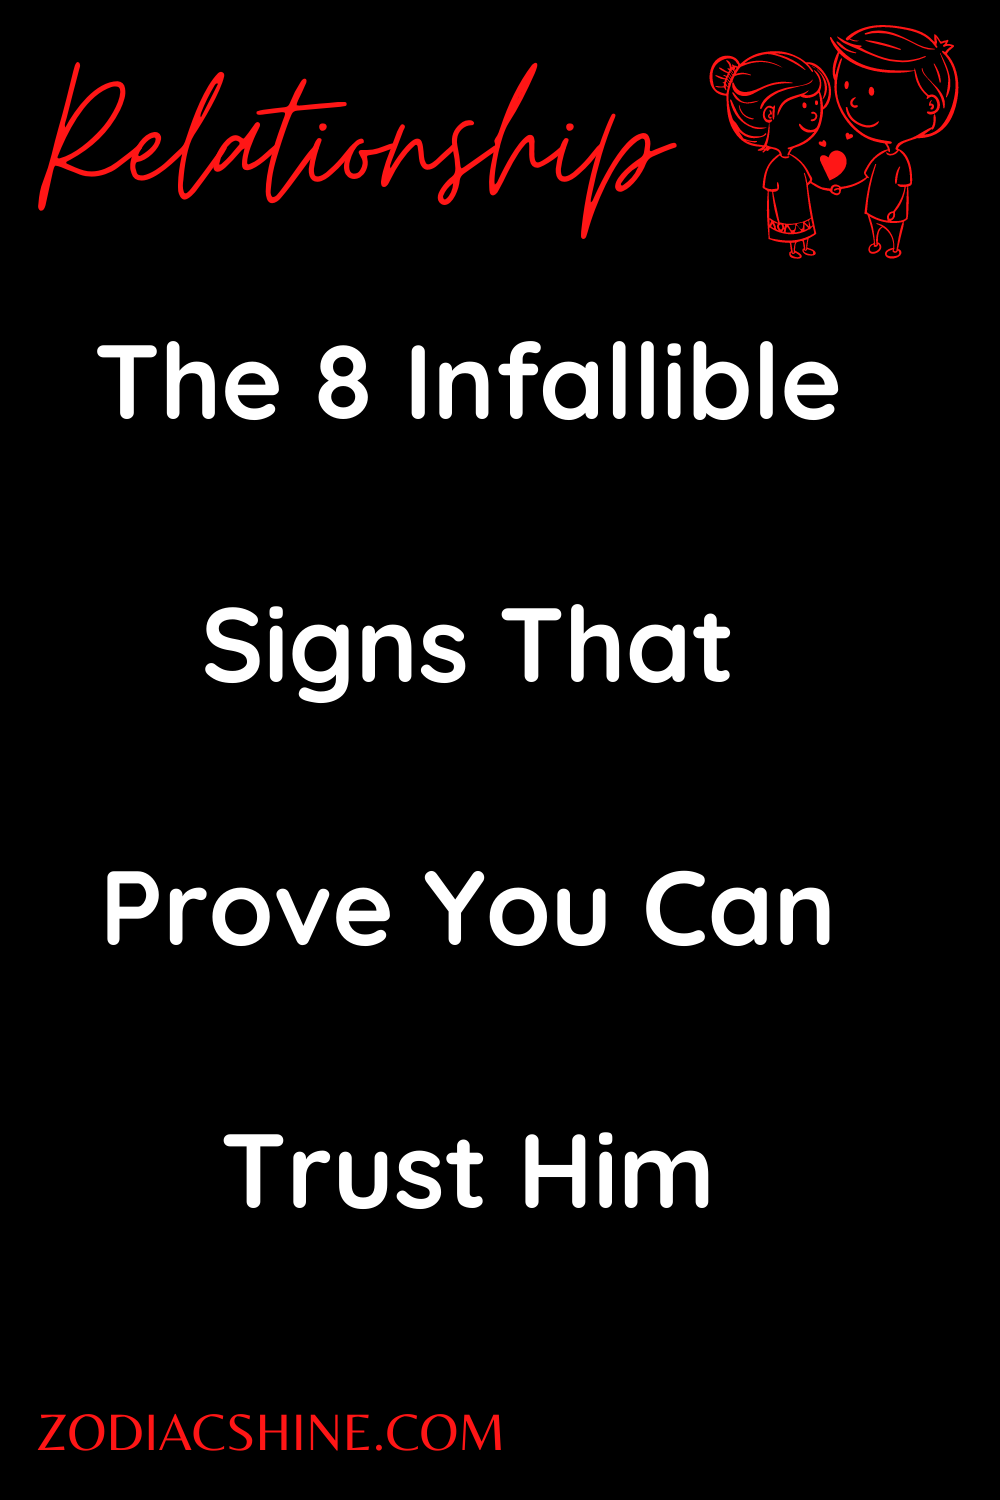 The 8 Infallible Signs That Prove You Can Trust Him